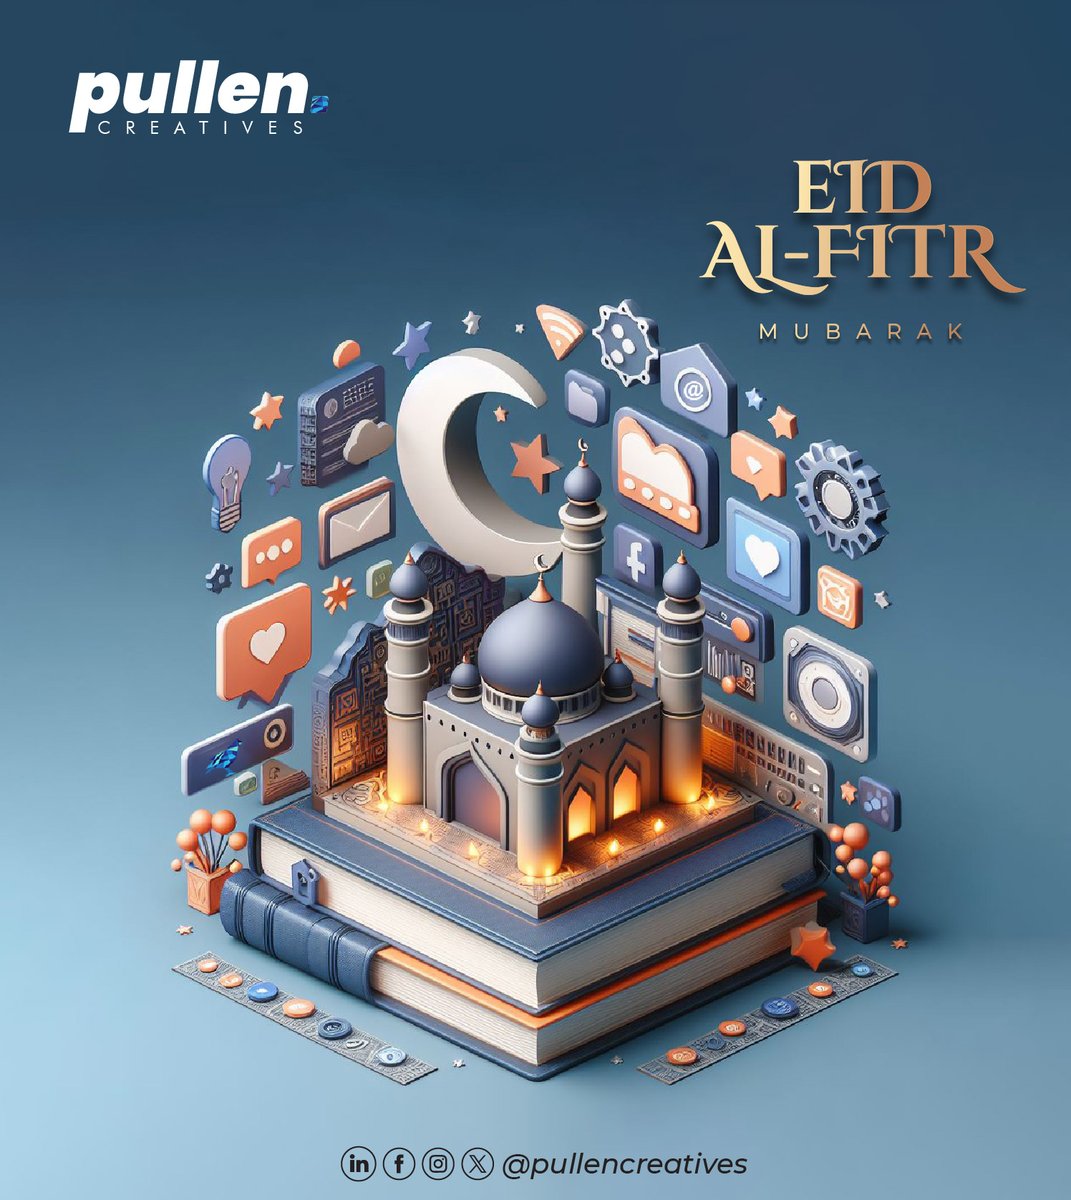 Wishing you and your loved ones a joyous Eid al-Fitr filled with happiness, peace, and blessings

#Eid2024